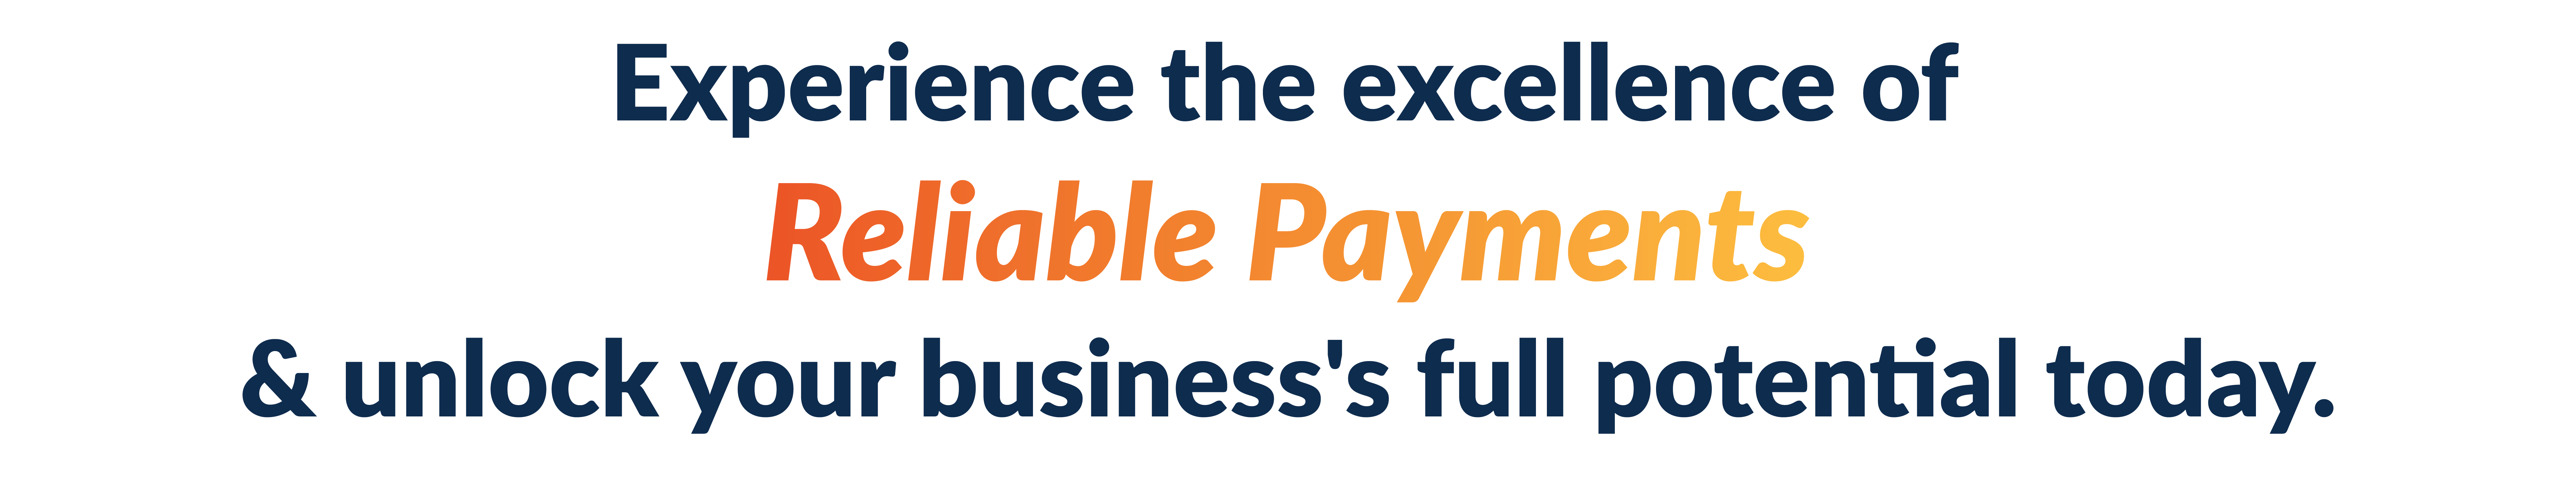 experience the excellence of reliable payments & unlock your business's full potential today. in a graphic text